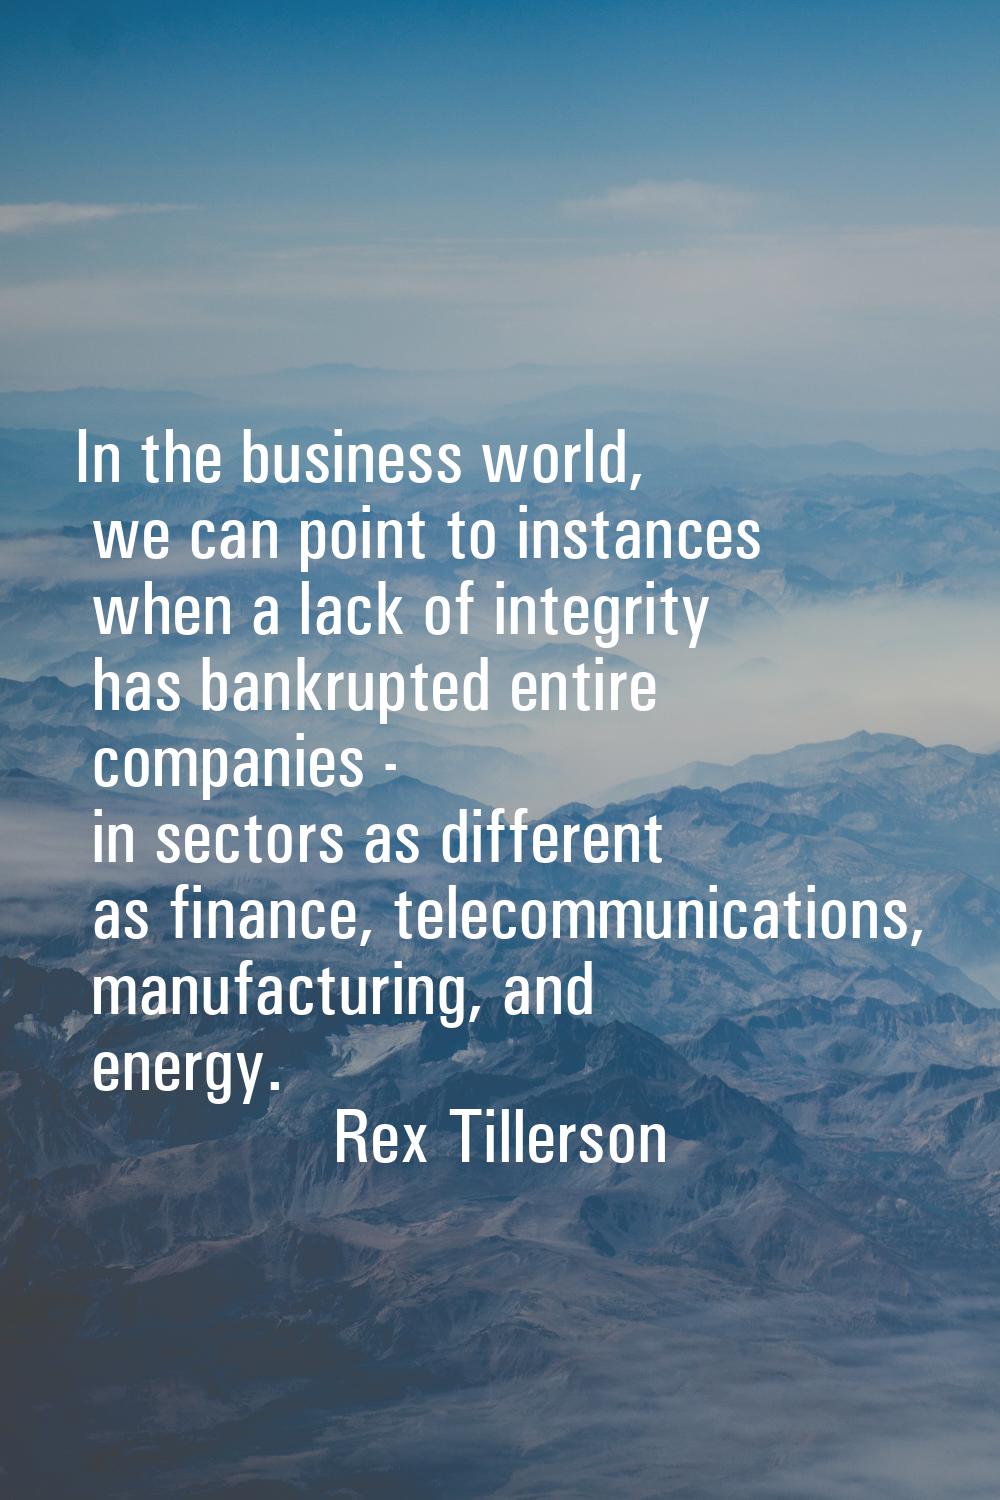 In the business world, we can point to instances when a lack of integrity has bankrupted entire com